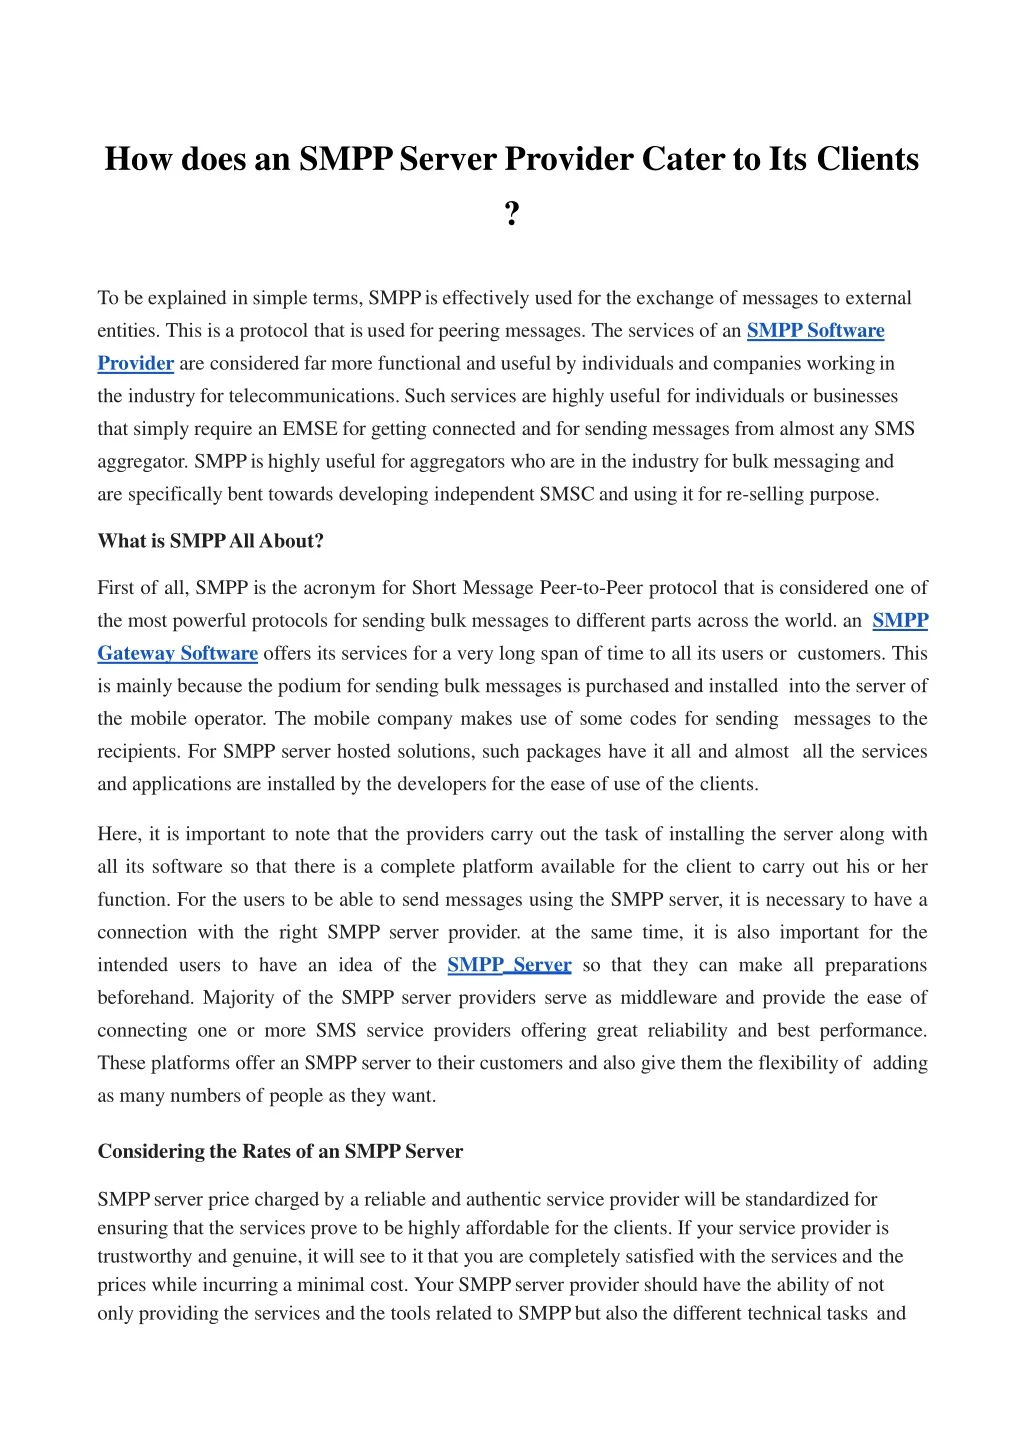 how does an smpp server provider cater